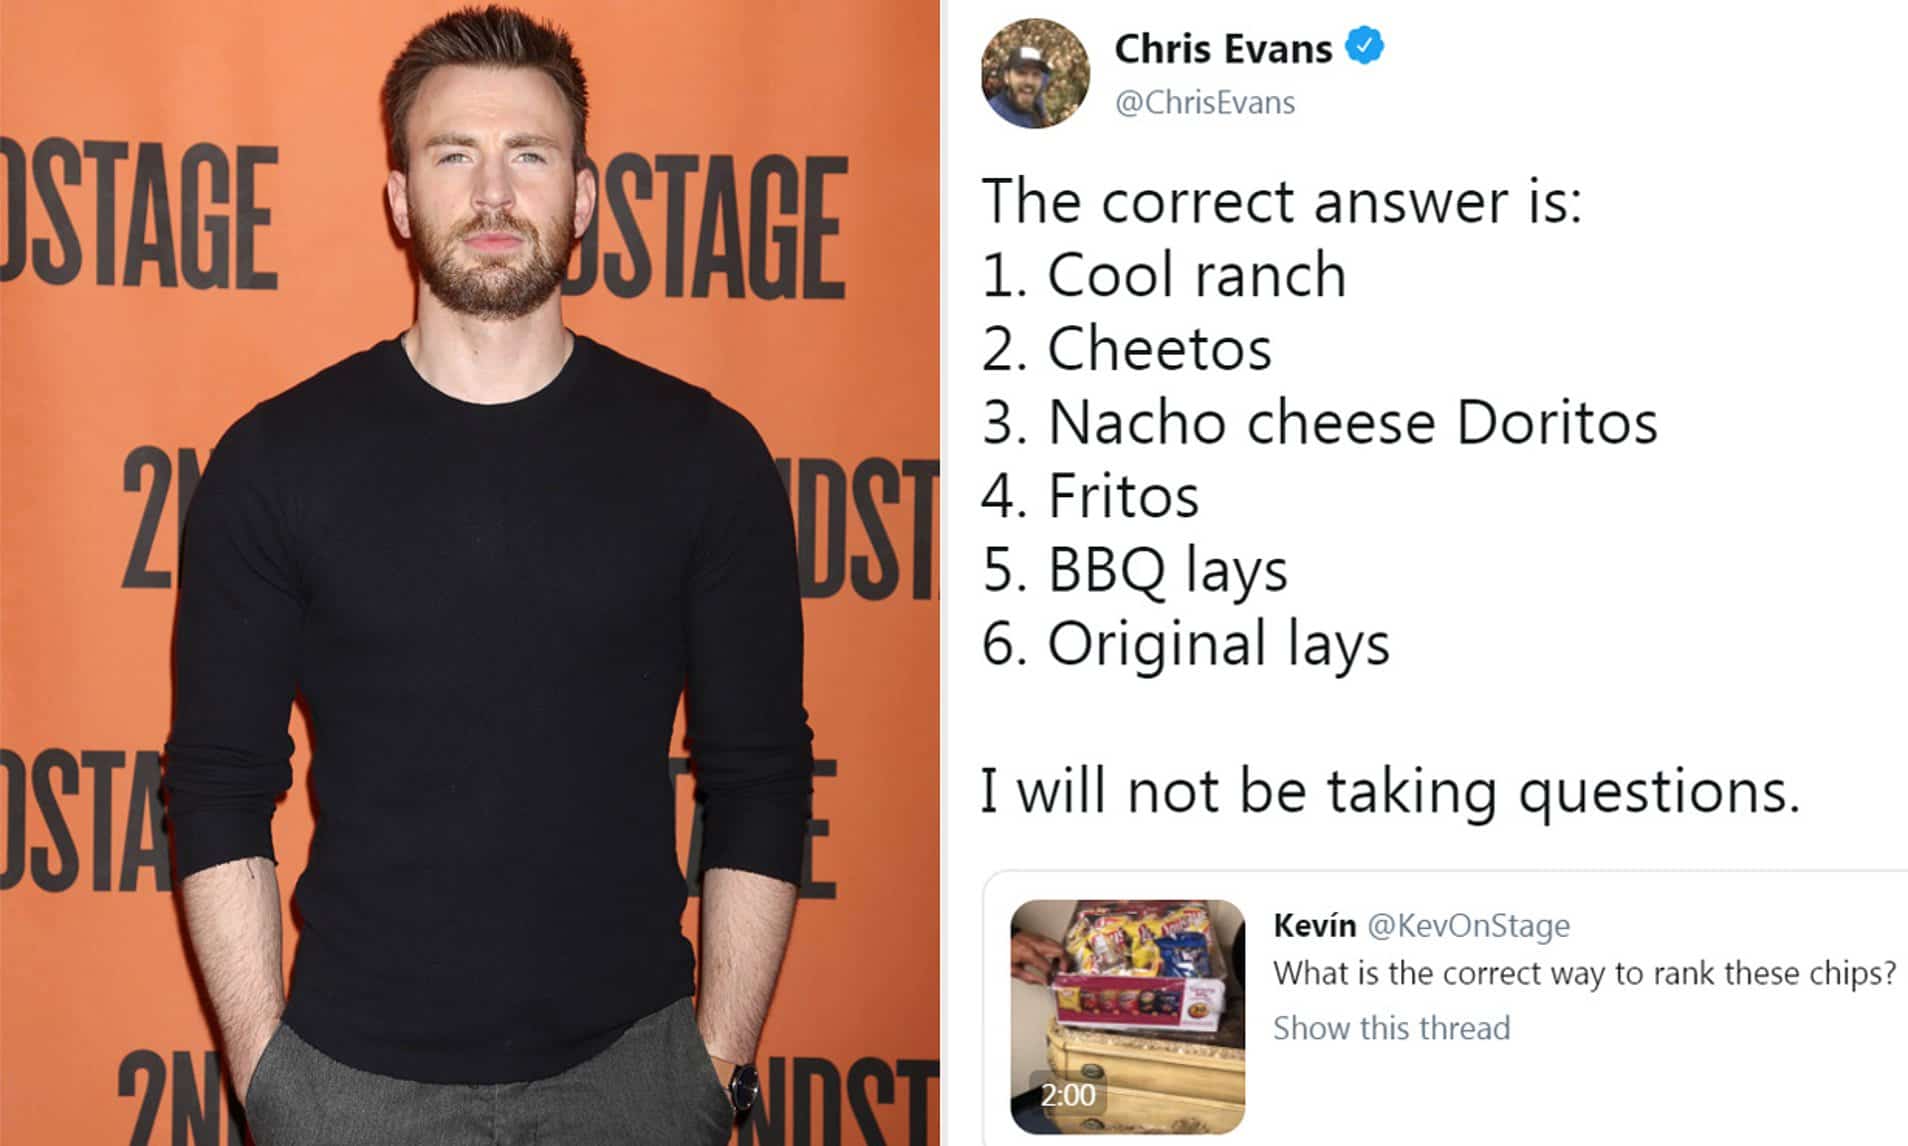 MCU Star Chris Evans Faces Twitter Storm With his Favourite Crisps Ranking